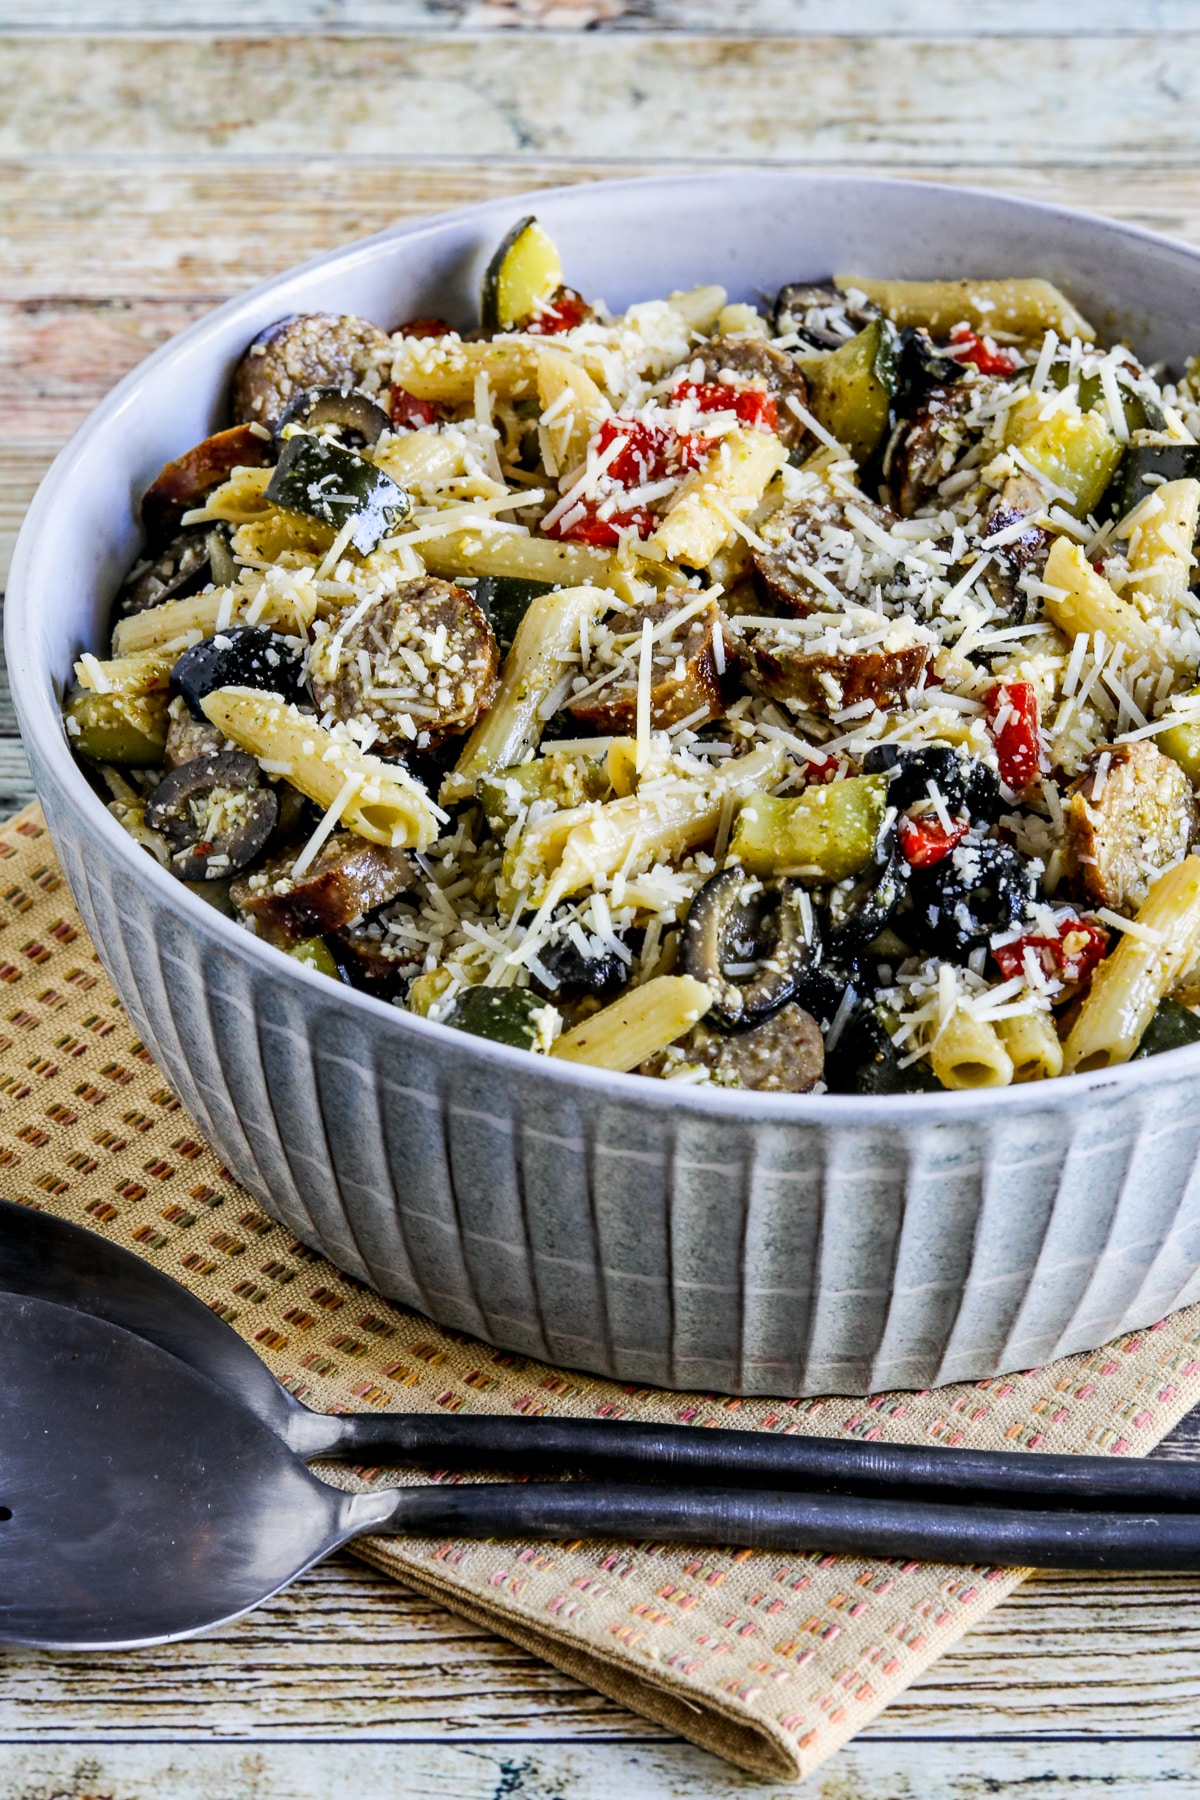 Pasta Salad with Sausage, Zucchini, Olives, and Peppers shown in serving bowl on napkin. 